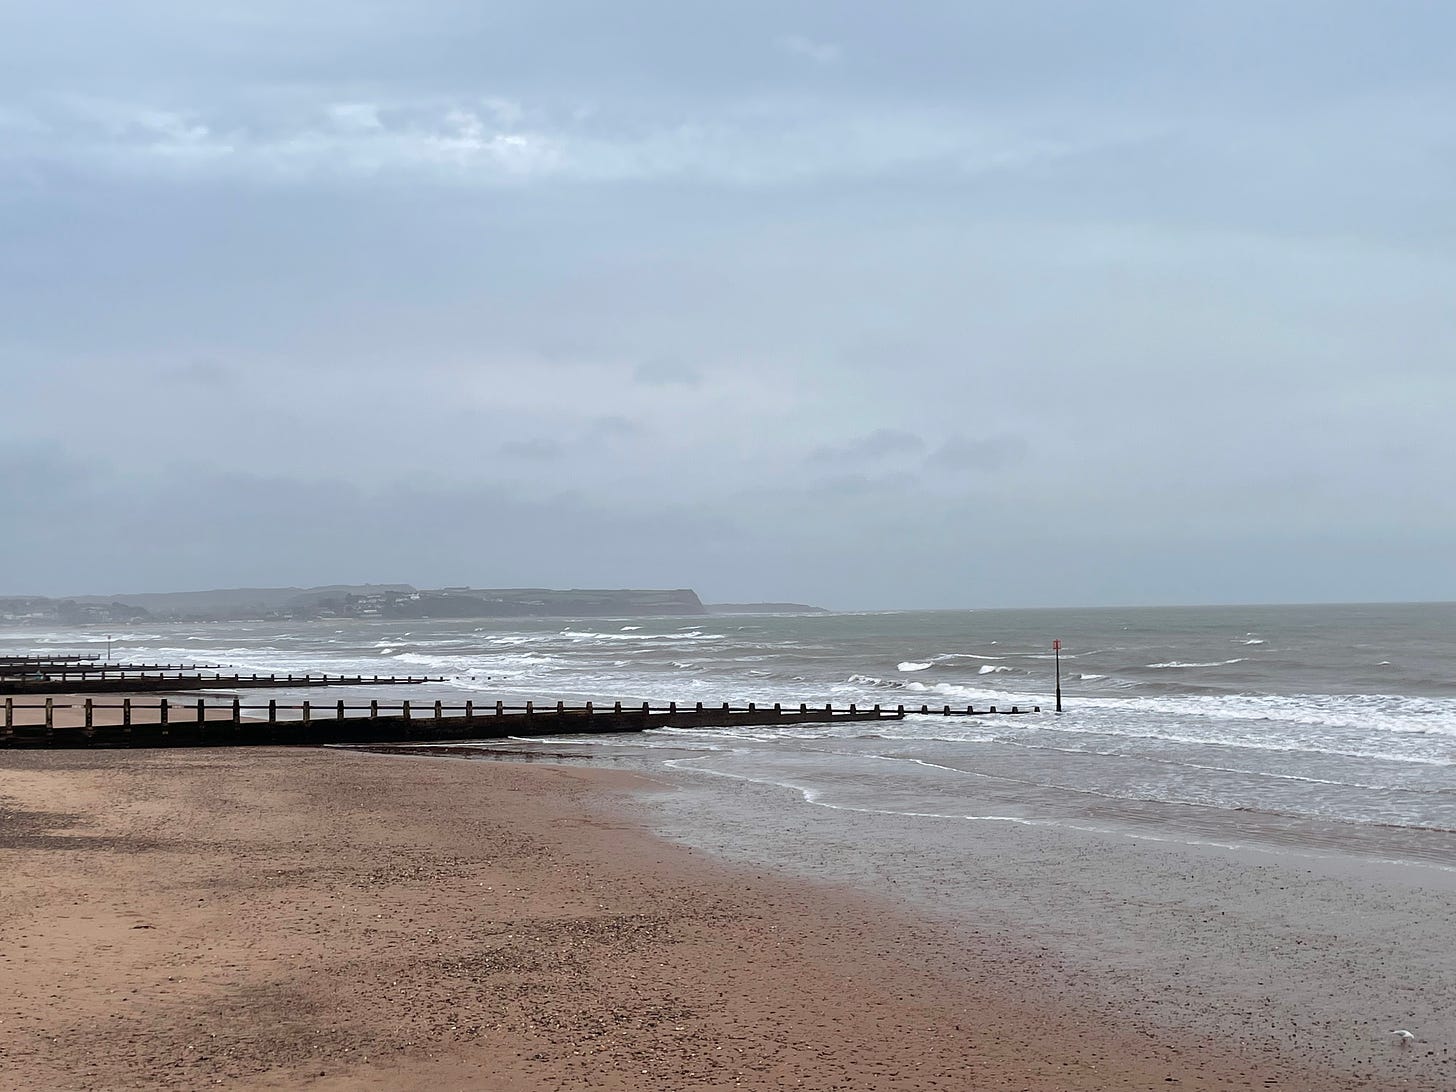 groynes along a seafront